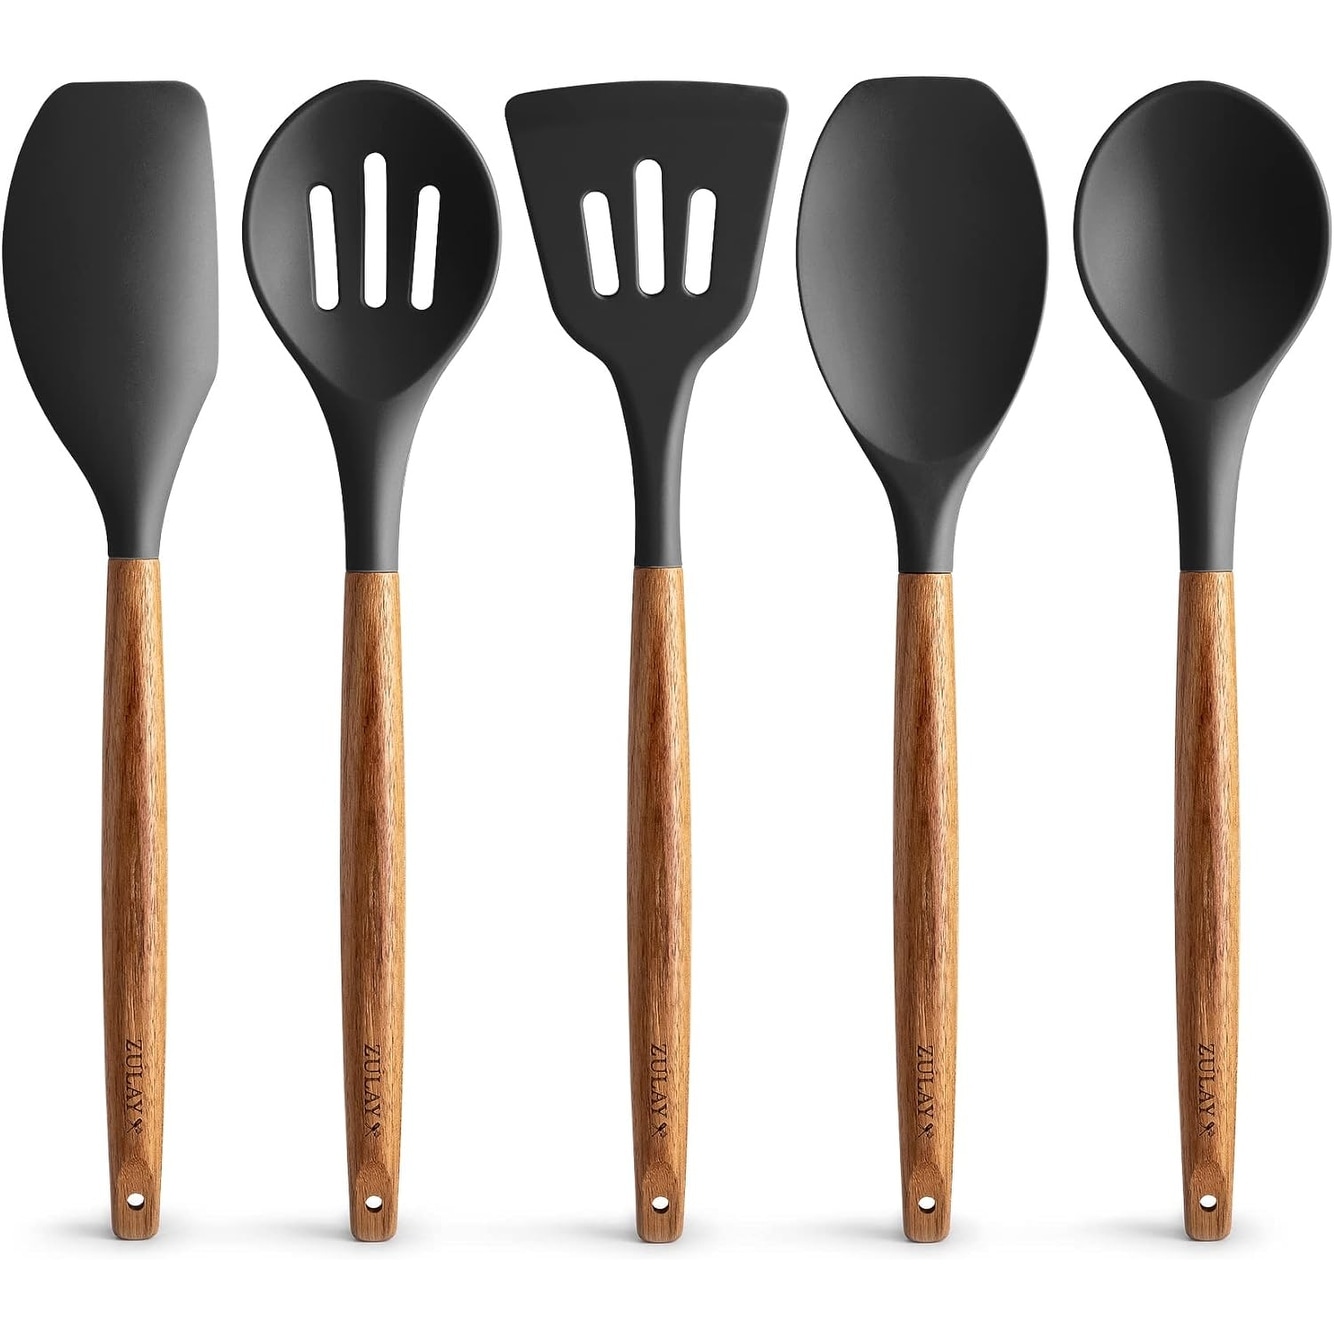 https://ak1.ostkcdn.com/images/products/is/images/direct/a6b5c7310395ca9d8ccc11d4940e40e9f56be10f/Zulay-Kitchen-Premium-5-Piece-Silicone-Utensils-Set-with-Authentic-Acacia-Hardwood-Handles.jpg